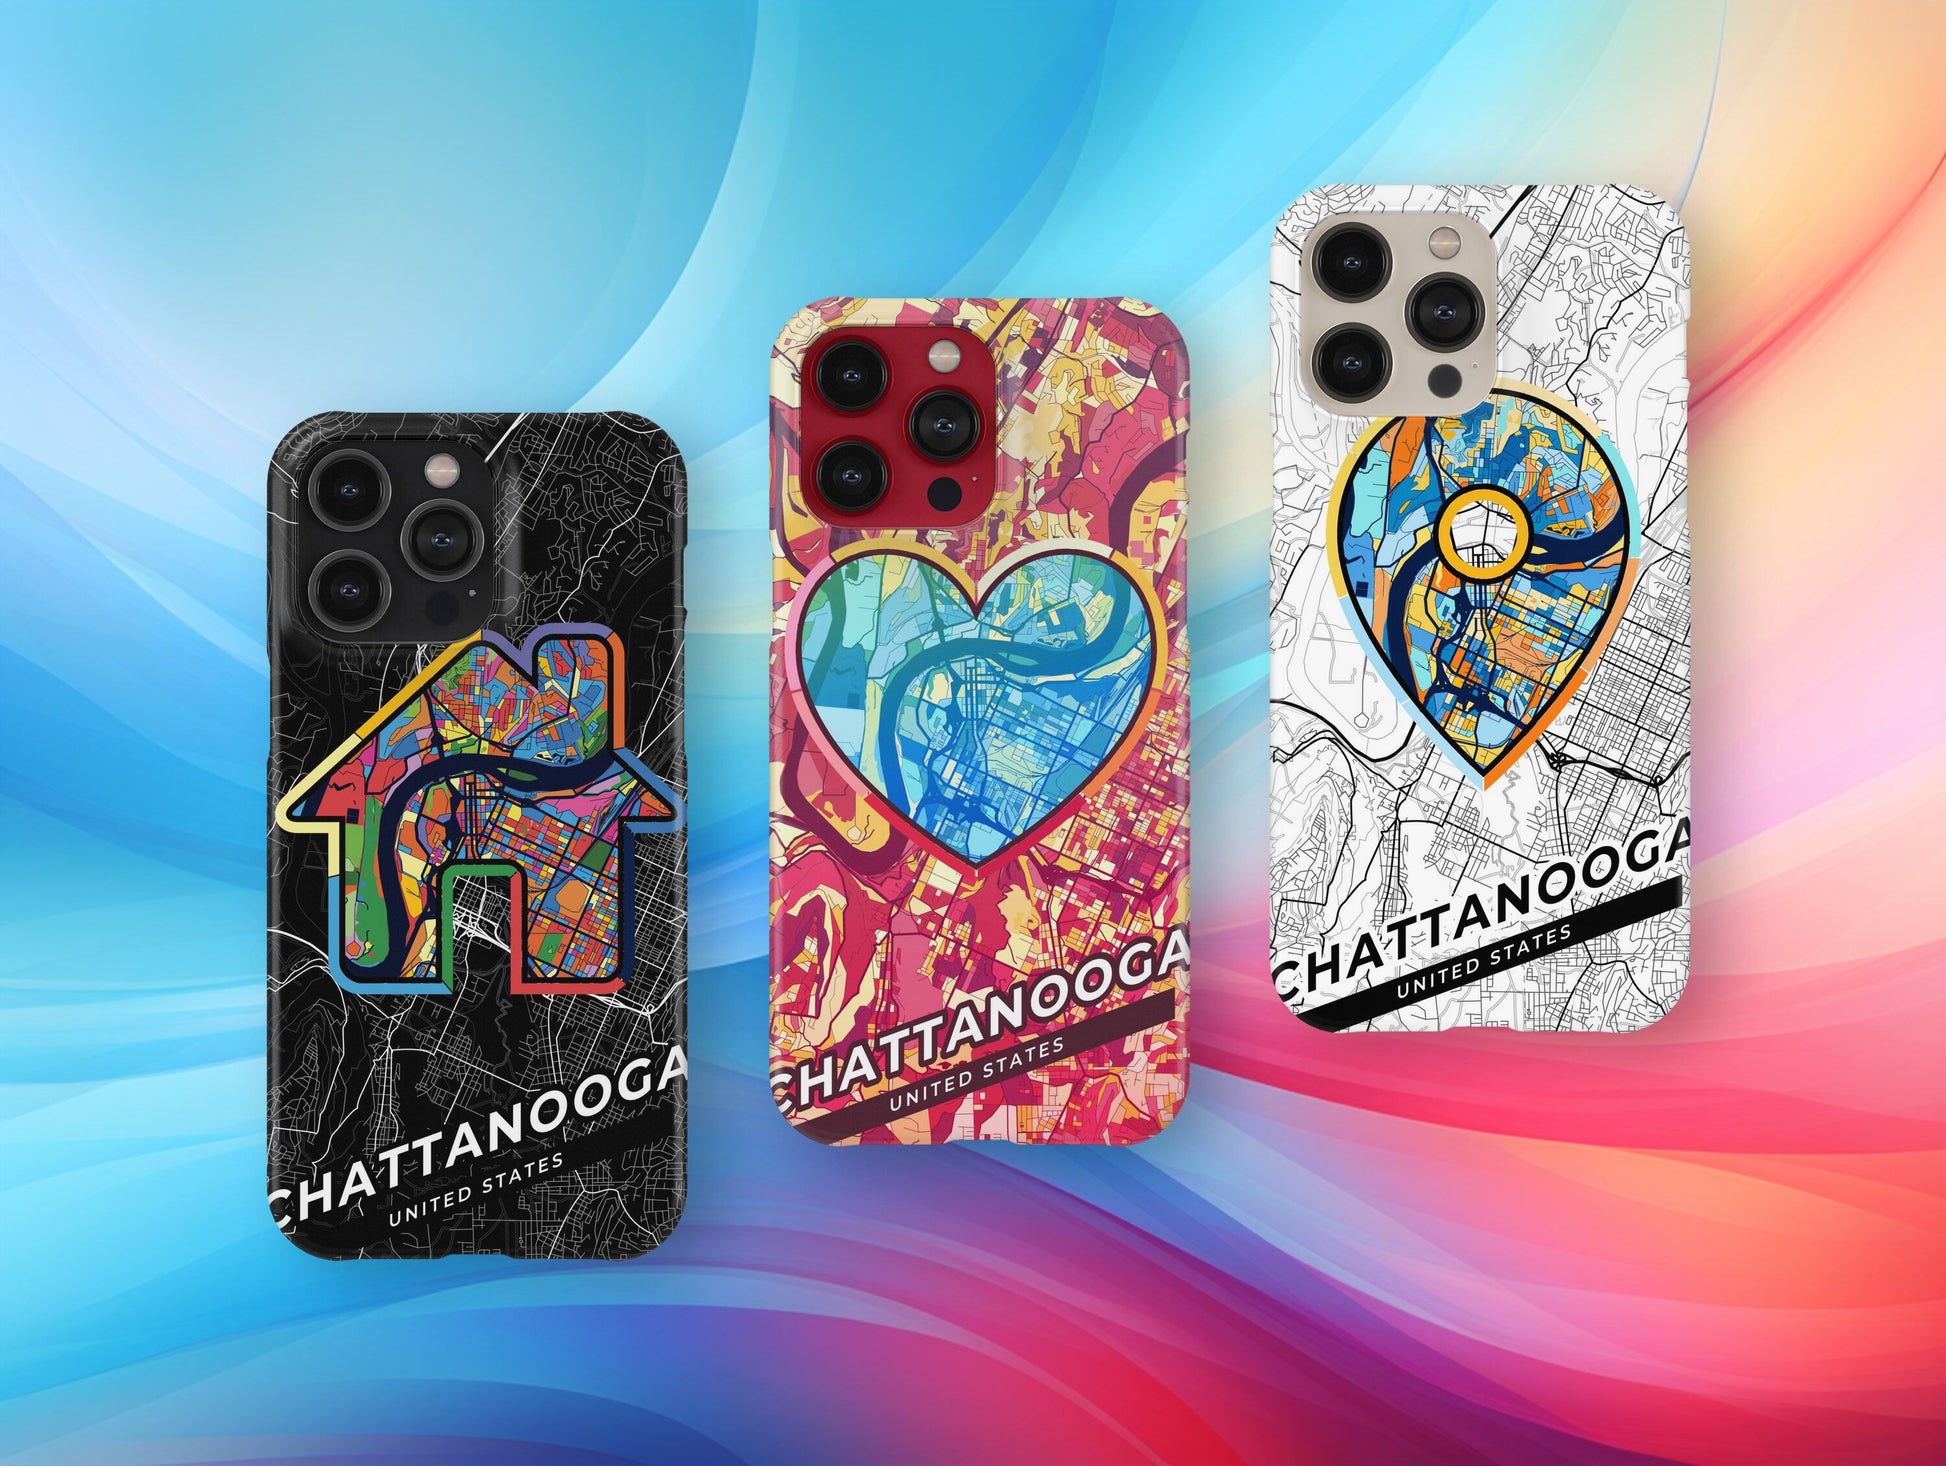 Chattanooga Tennessee slim phone case with colorful icon. Birthday, wedding or housewarming gift. Couple match cases.